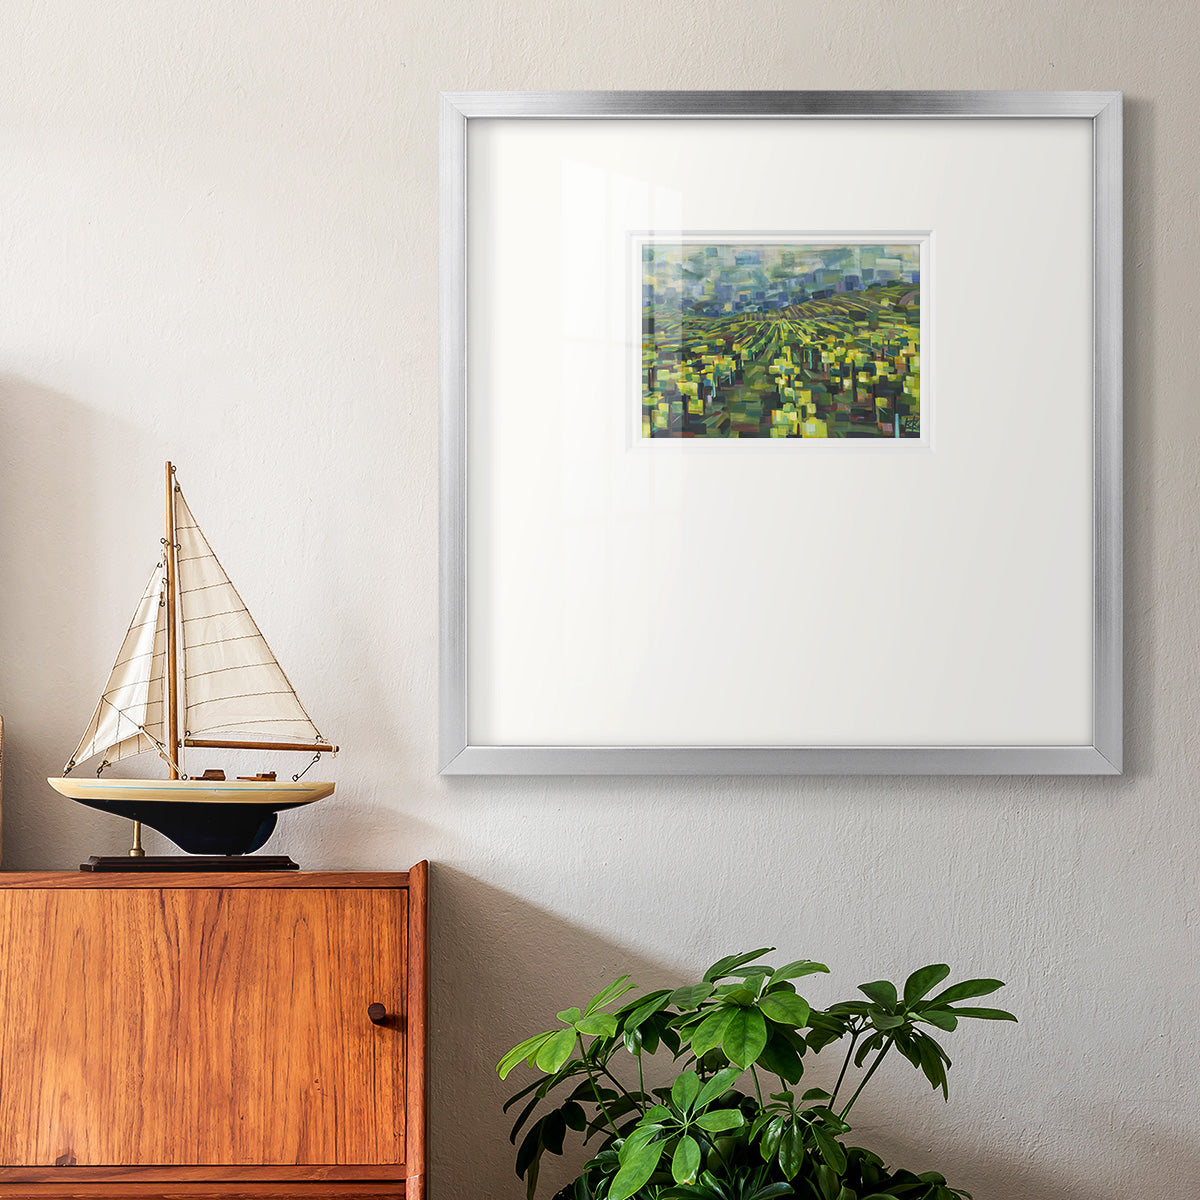 Yellow Grapevines Forever- Premium Framed Print Double Matboard